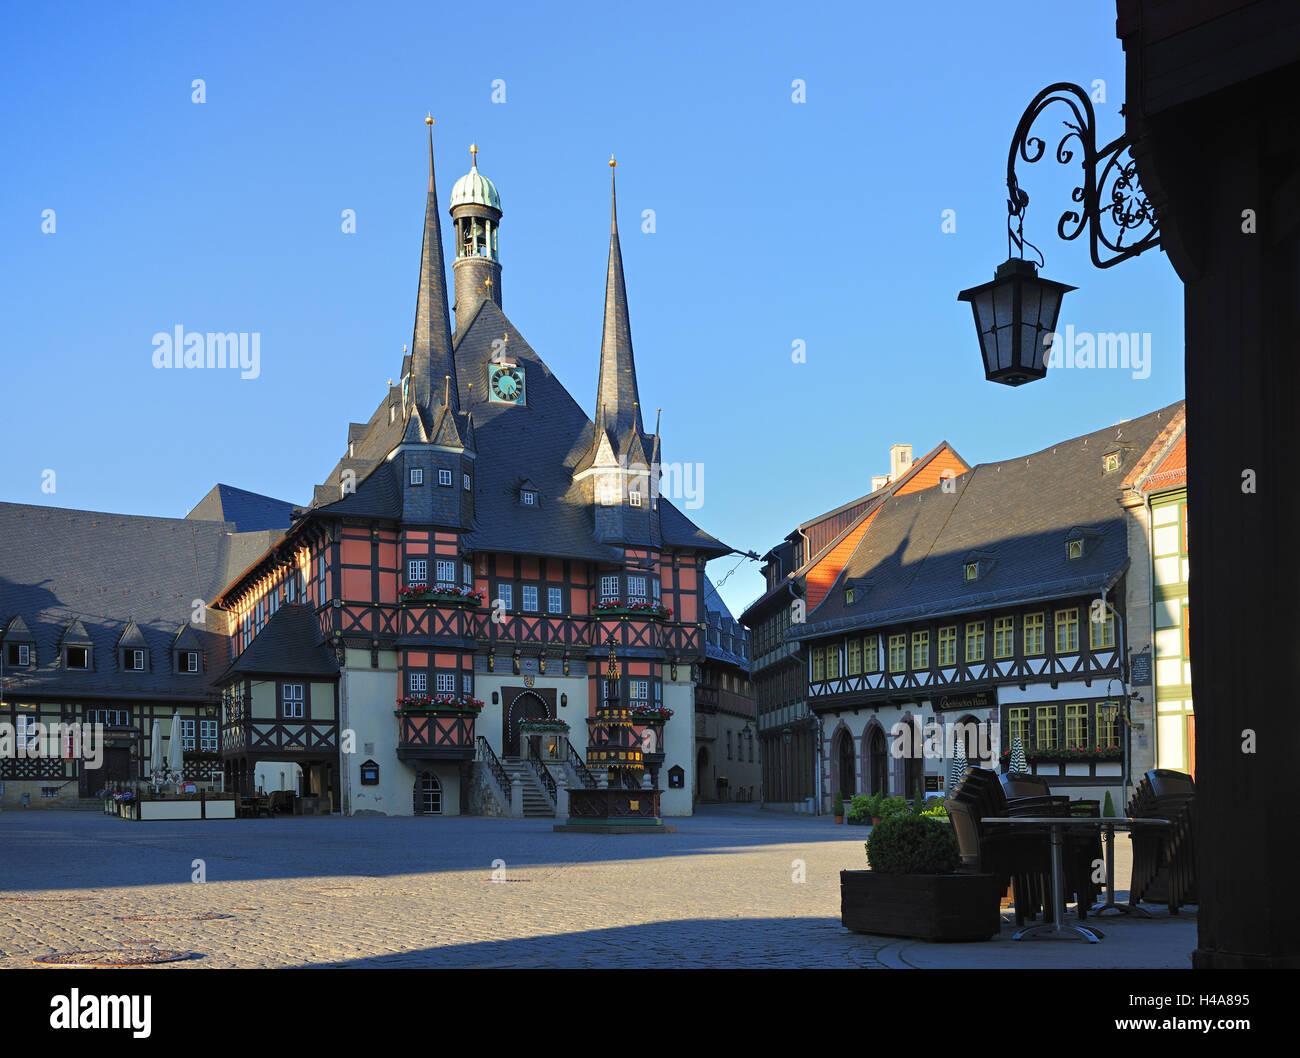 Germany, Saxony-Anhalt, resin, Wernigerode, city hall, outside, architectural style, Gothic, romantically, medievally, typically, half-timbered, Old Town, Idyll, architecture, tourism, place of interest, street, lane, half-timbered houses, historically, m Stock Photo